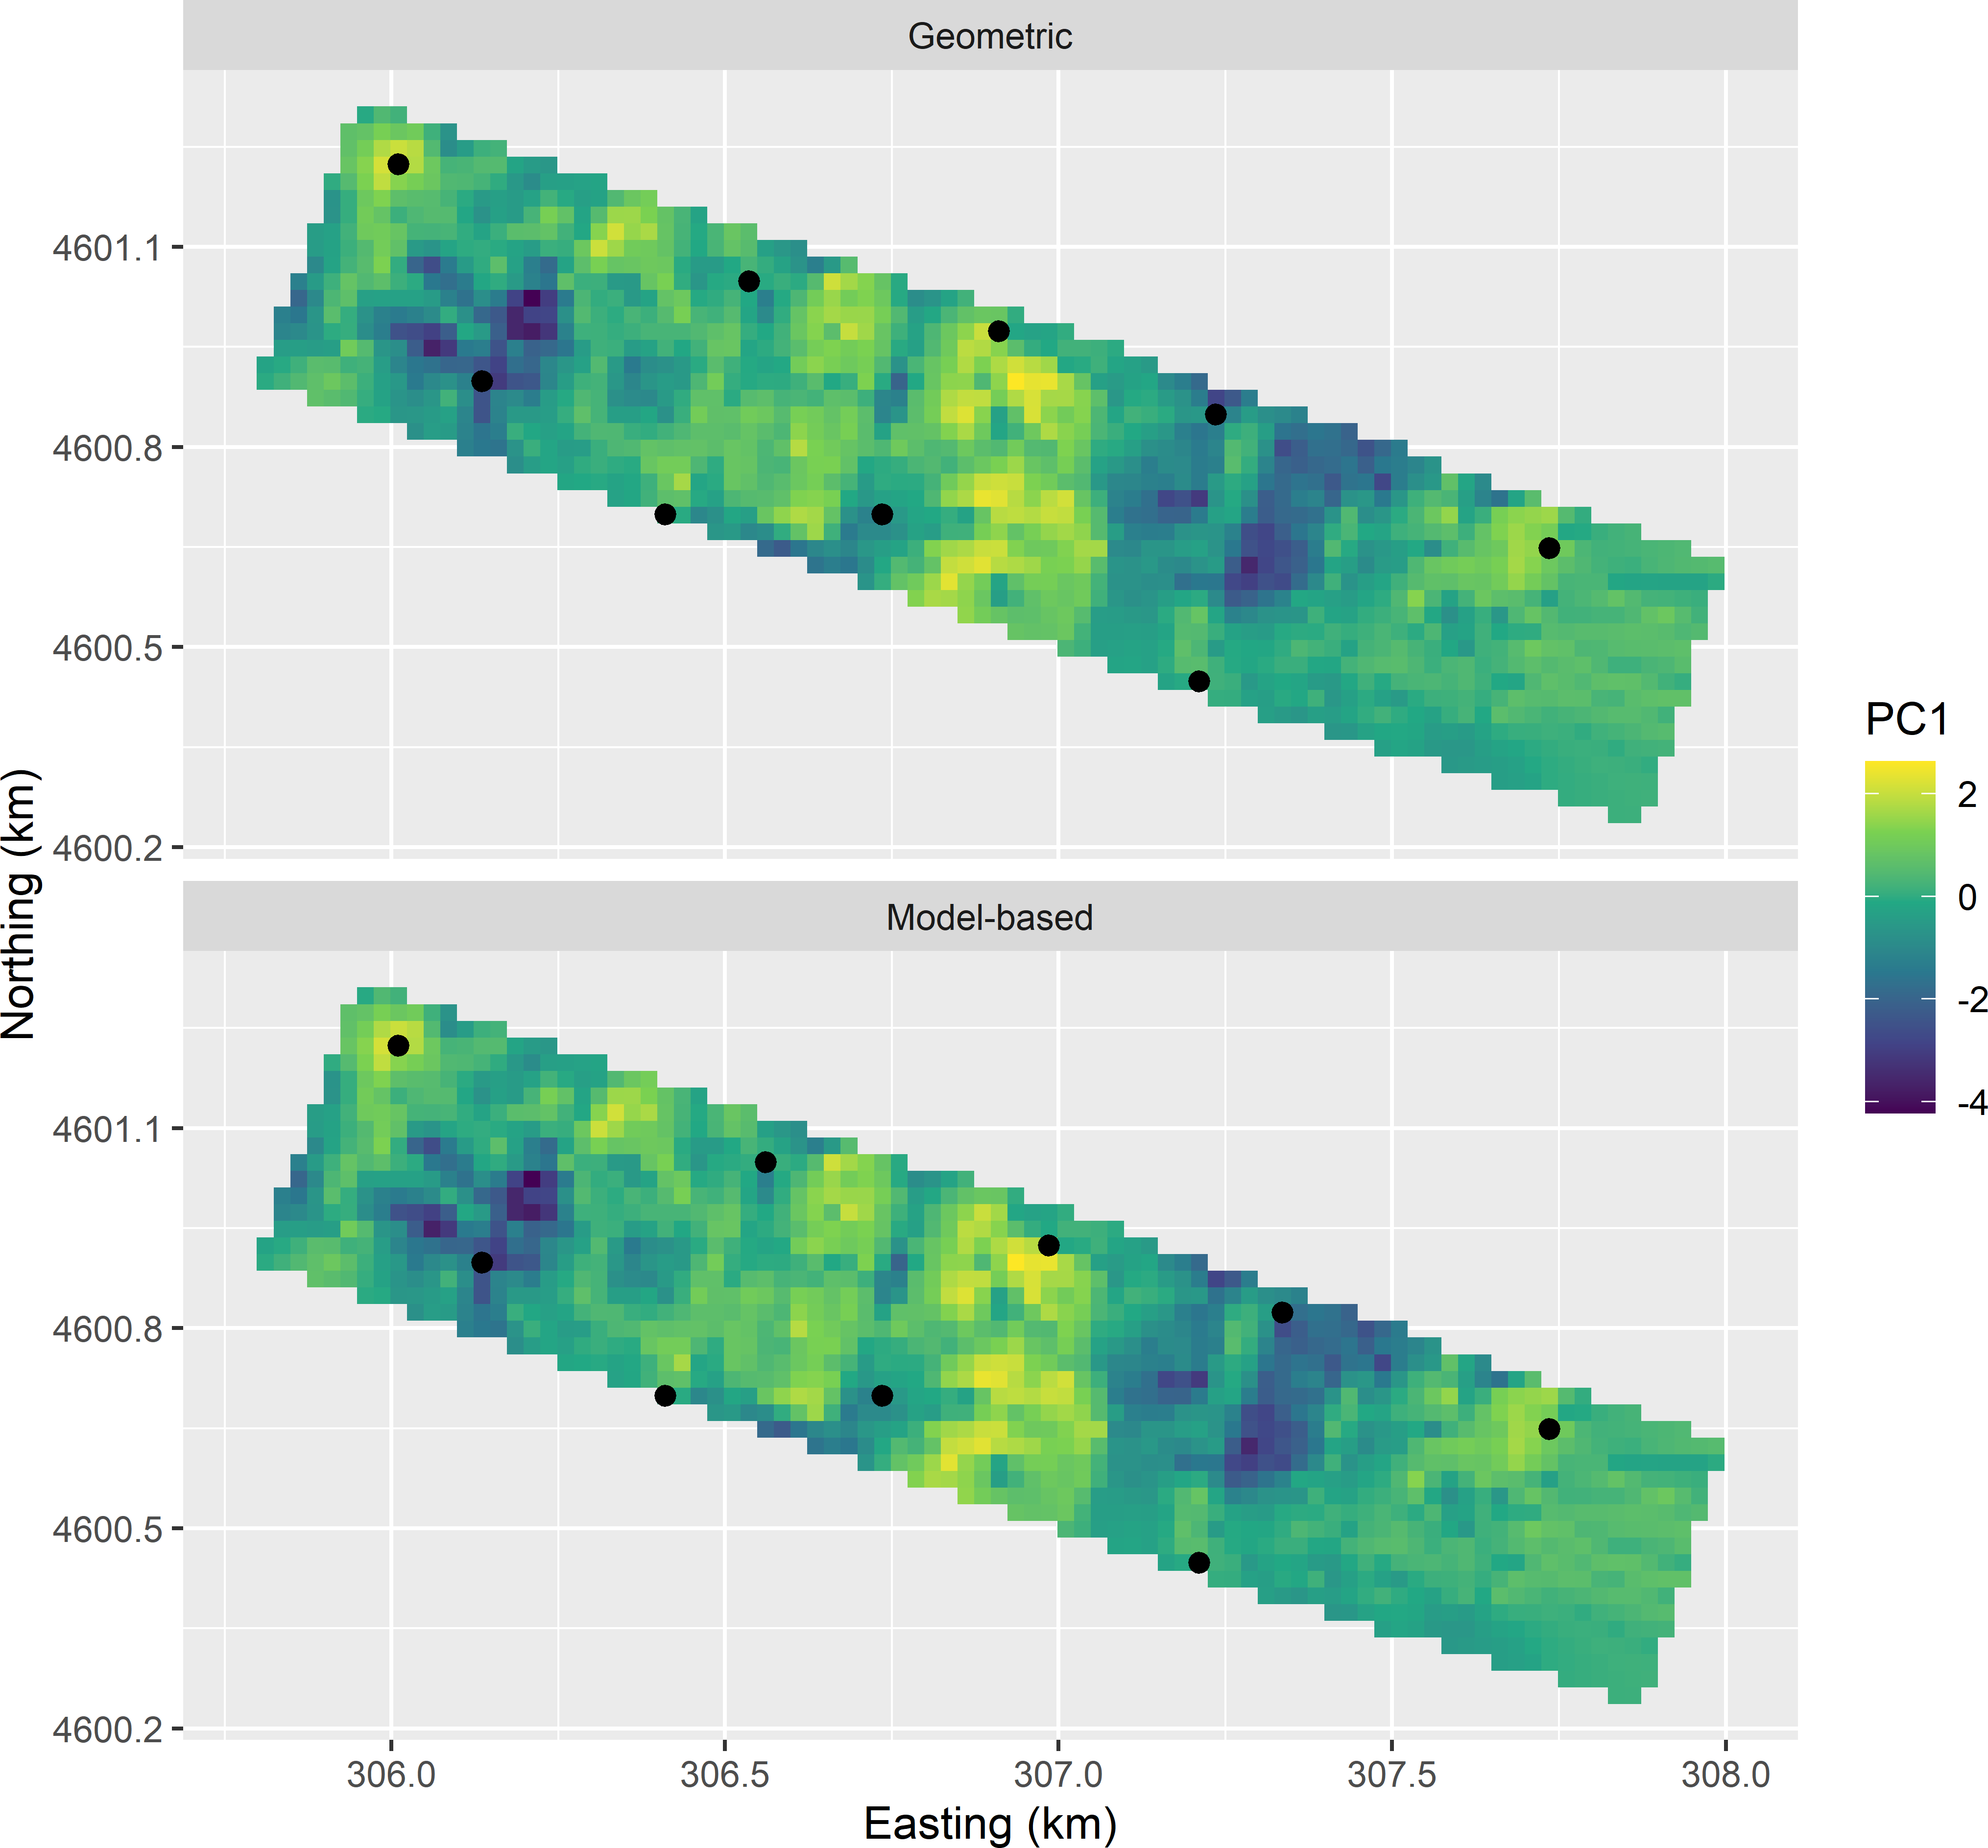 CCRSD sample from the Cotton Research Farm, optimised with the geometric and the model-based criterion, plotted on a map of the first standardised principal component (PC1).